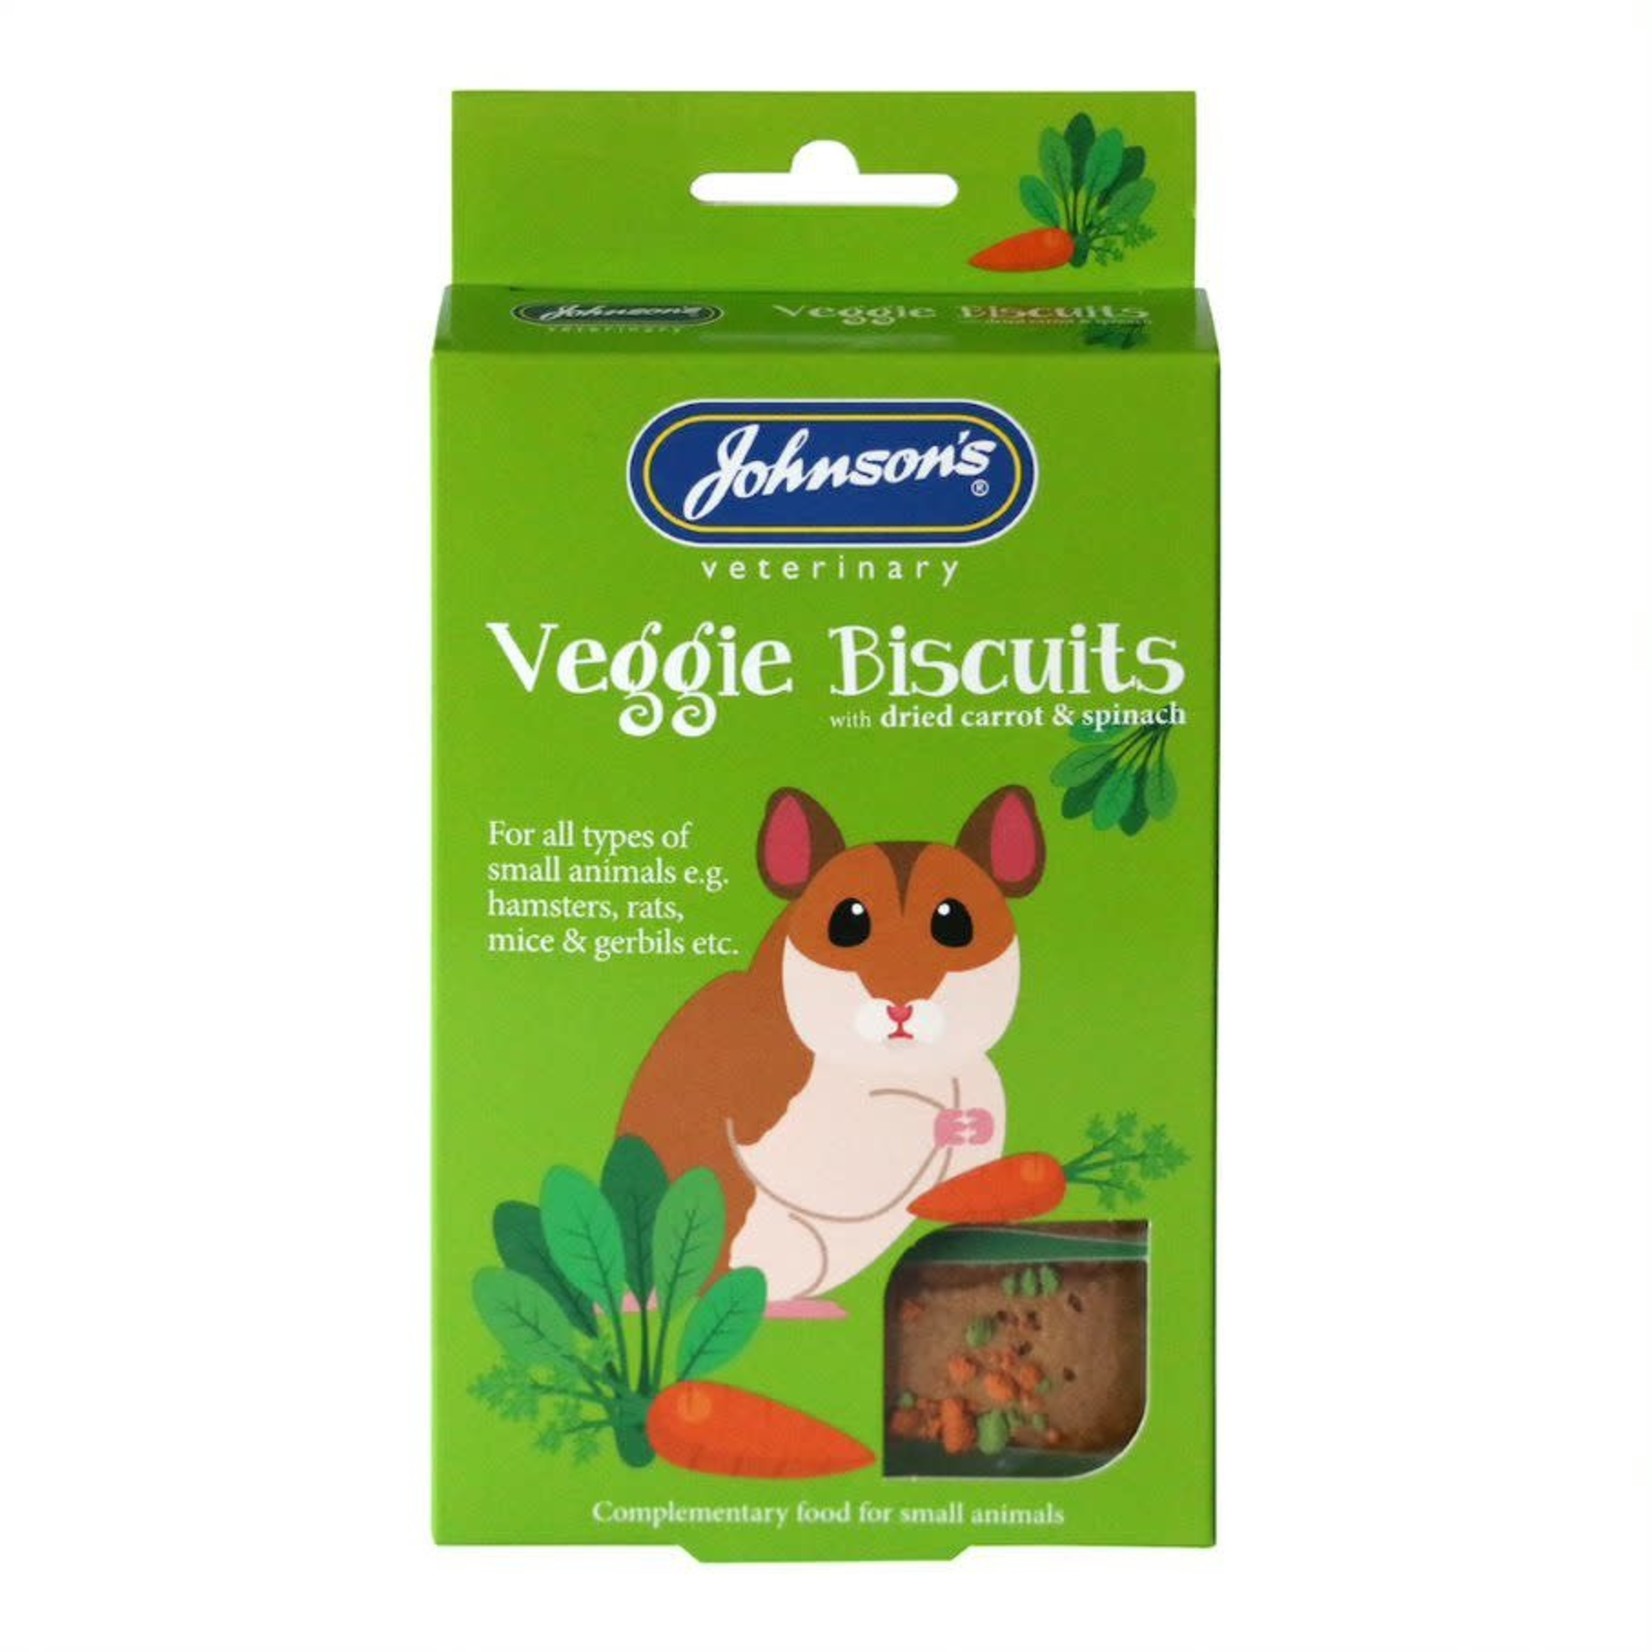 Johnson's Veterinary Veggie Biscuits Treats with Dried Carrot & Spinach for Small Animals